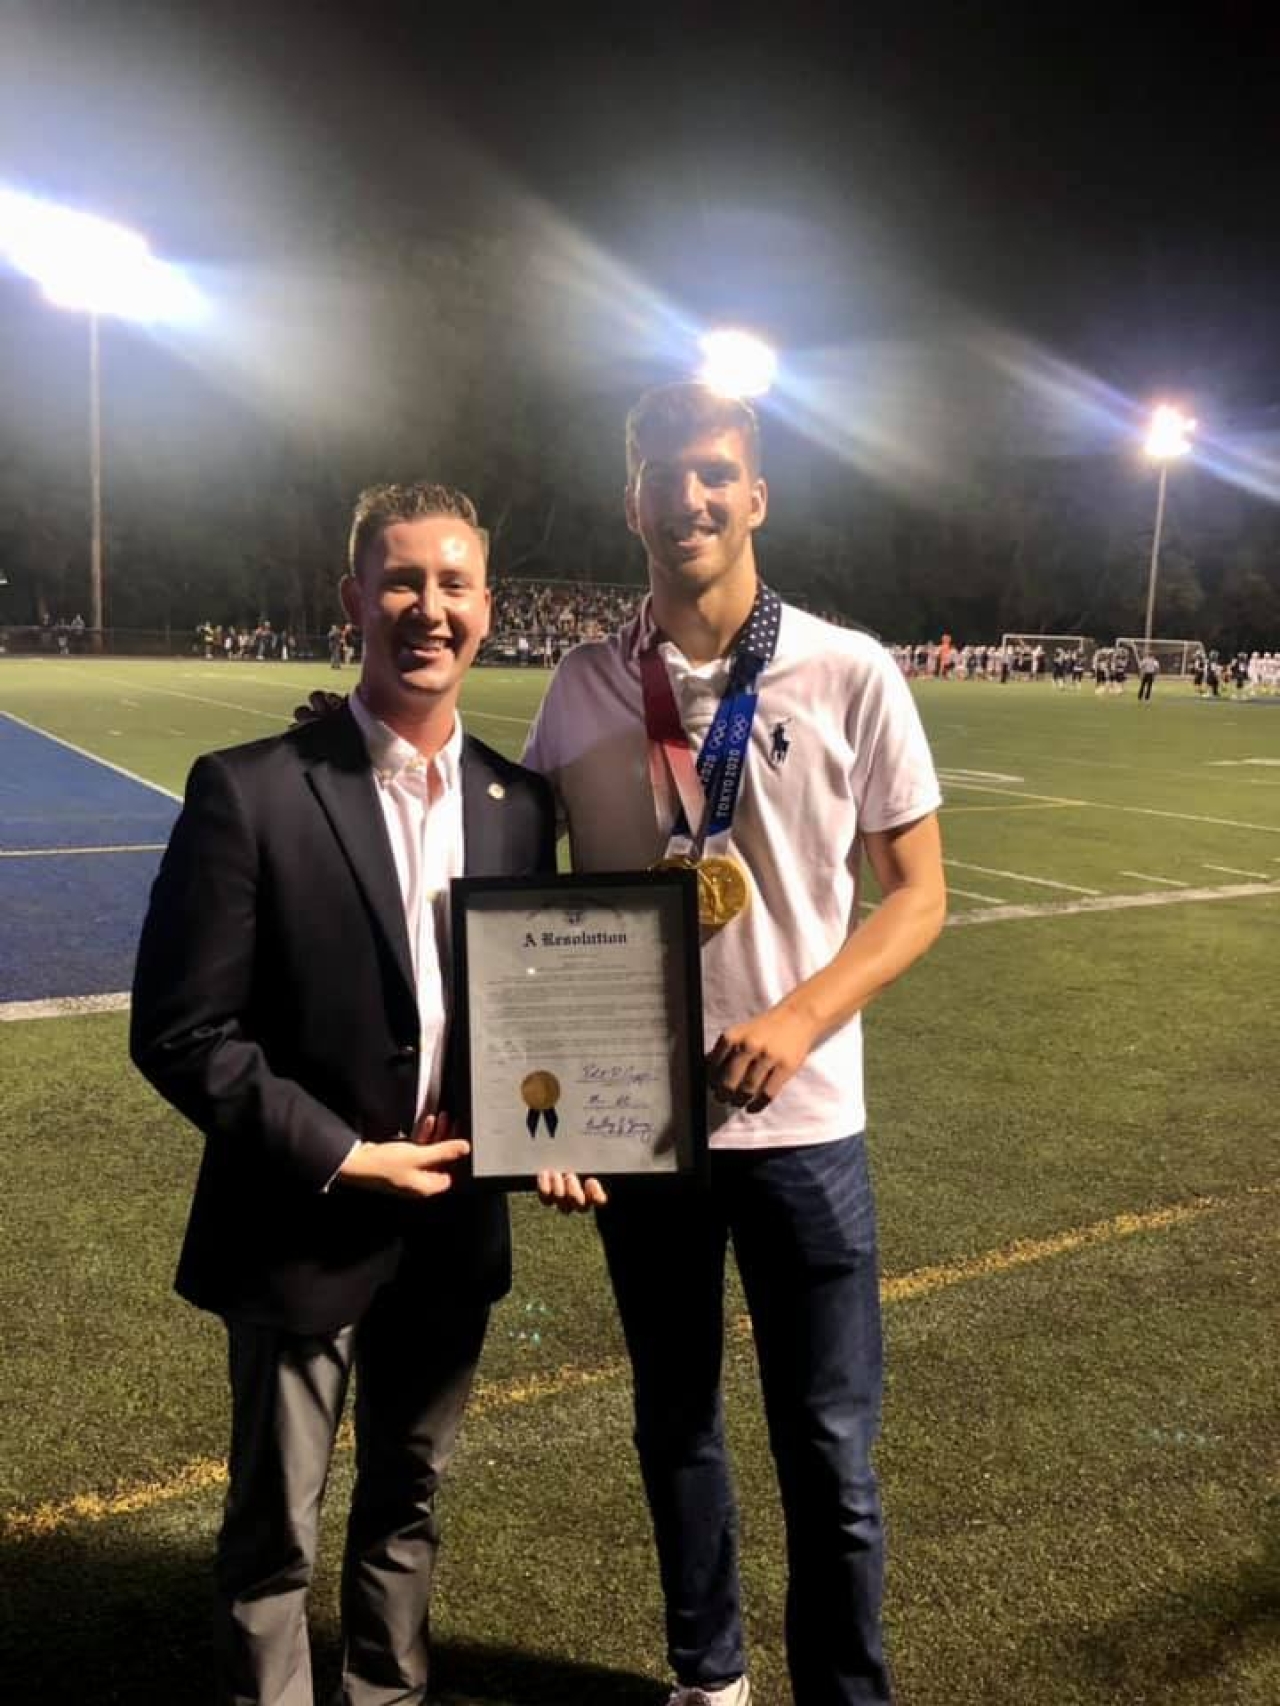 Rep. Hall presented a resolution to Olympic Gold Medalist Zach Apple at the Edgewood vs. Talawanda football game for the Madison Field Turf Dedication.